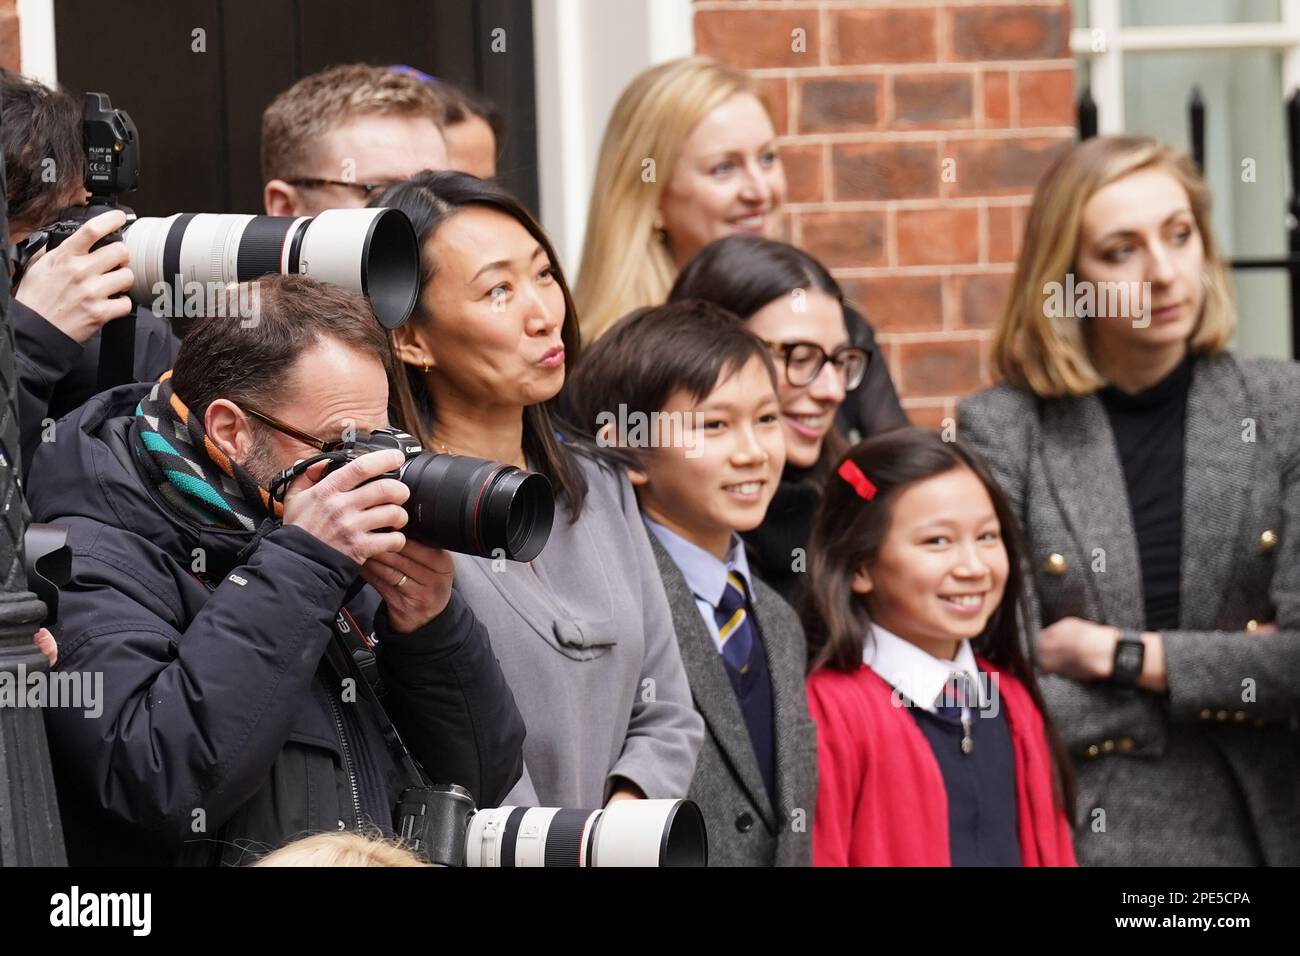 RETRANSMITTING AMENDING CAPTION Chancellor of the Exchequer Jeremy Hunt's wife Lucia Hunt and their children watch as he leaves 11 Downing Street, London, with his ministerial box, before delivering his Budget at the Houses of Parliament. Picture date: Wednesday March 15, 2023. See PA story POLITICS Budget. Photo credit should read: Stefan Rousseau/PA Wire Stock Photo